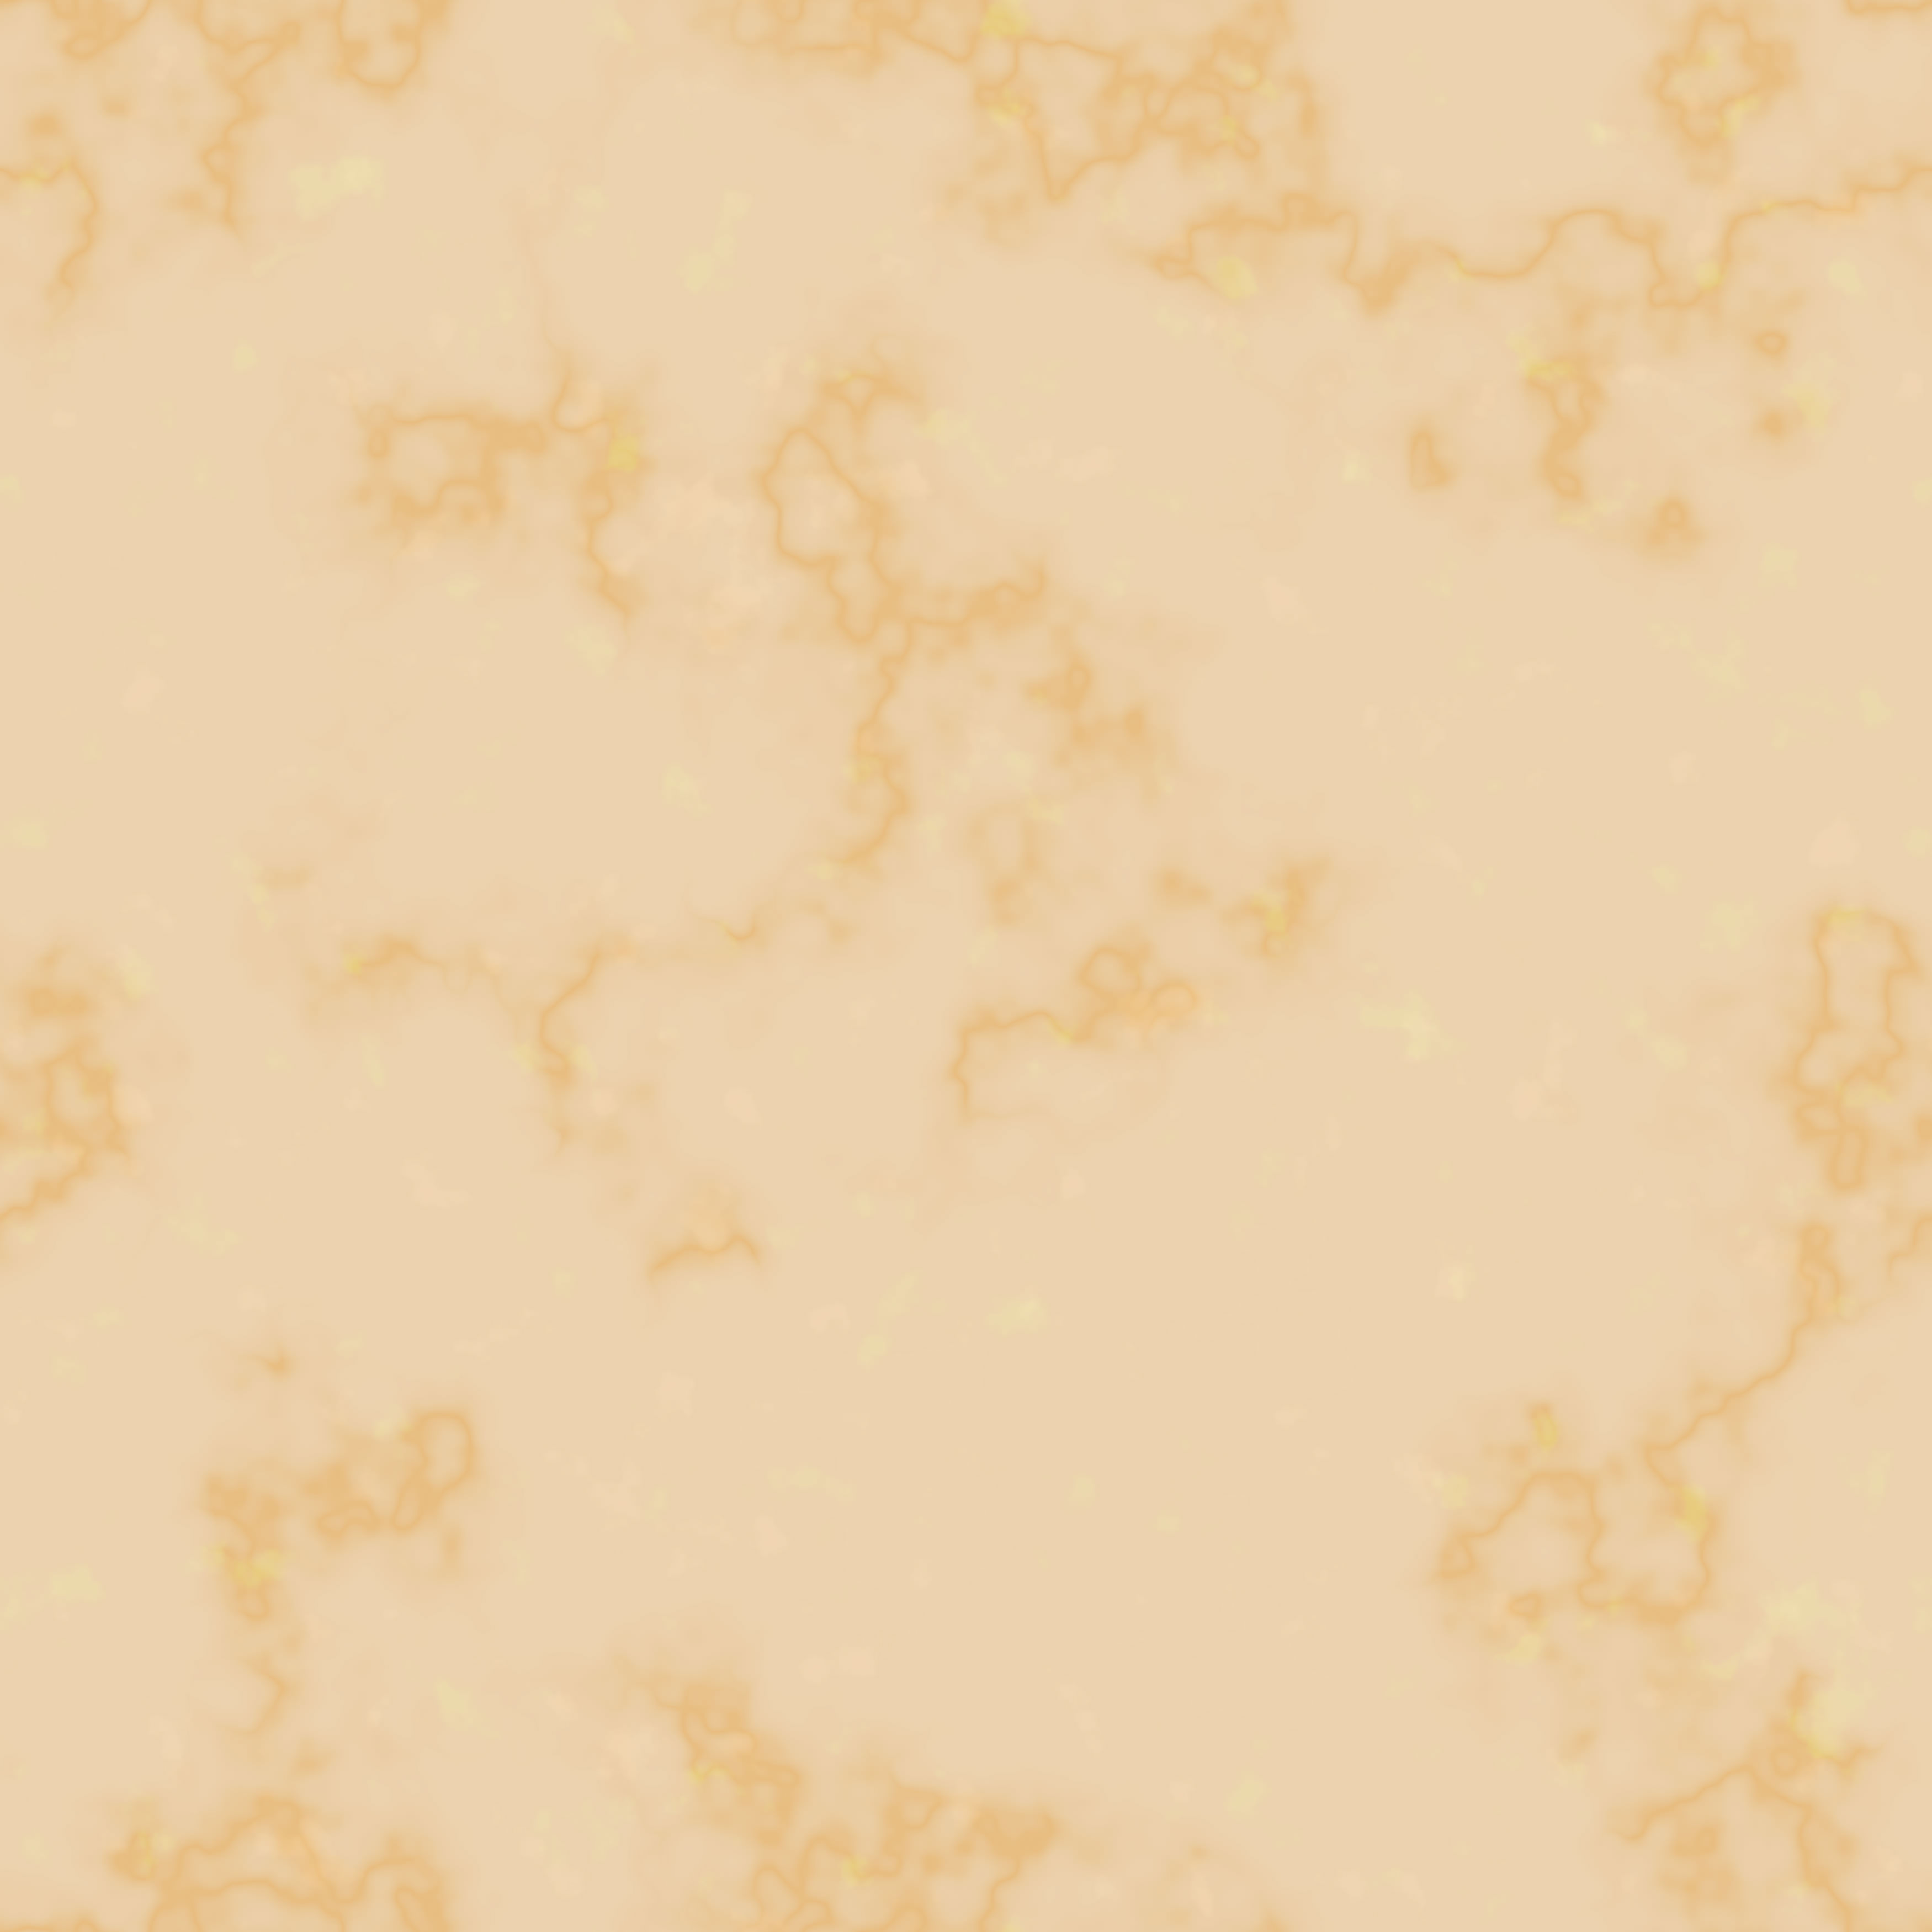 Pale Seamless Brown Marble Texture